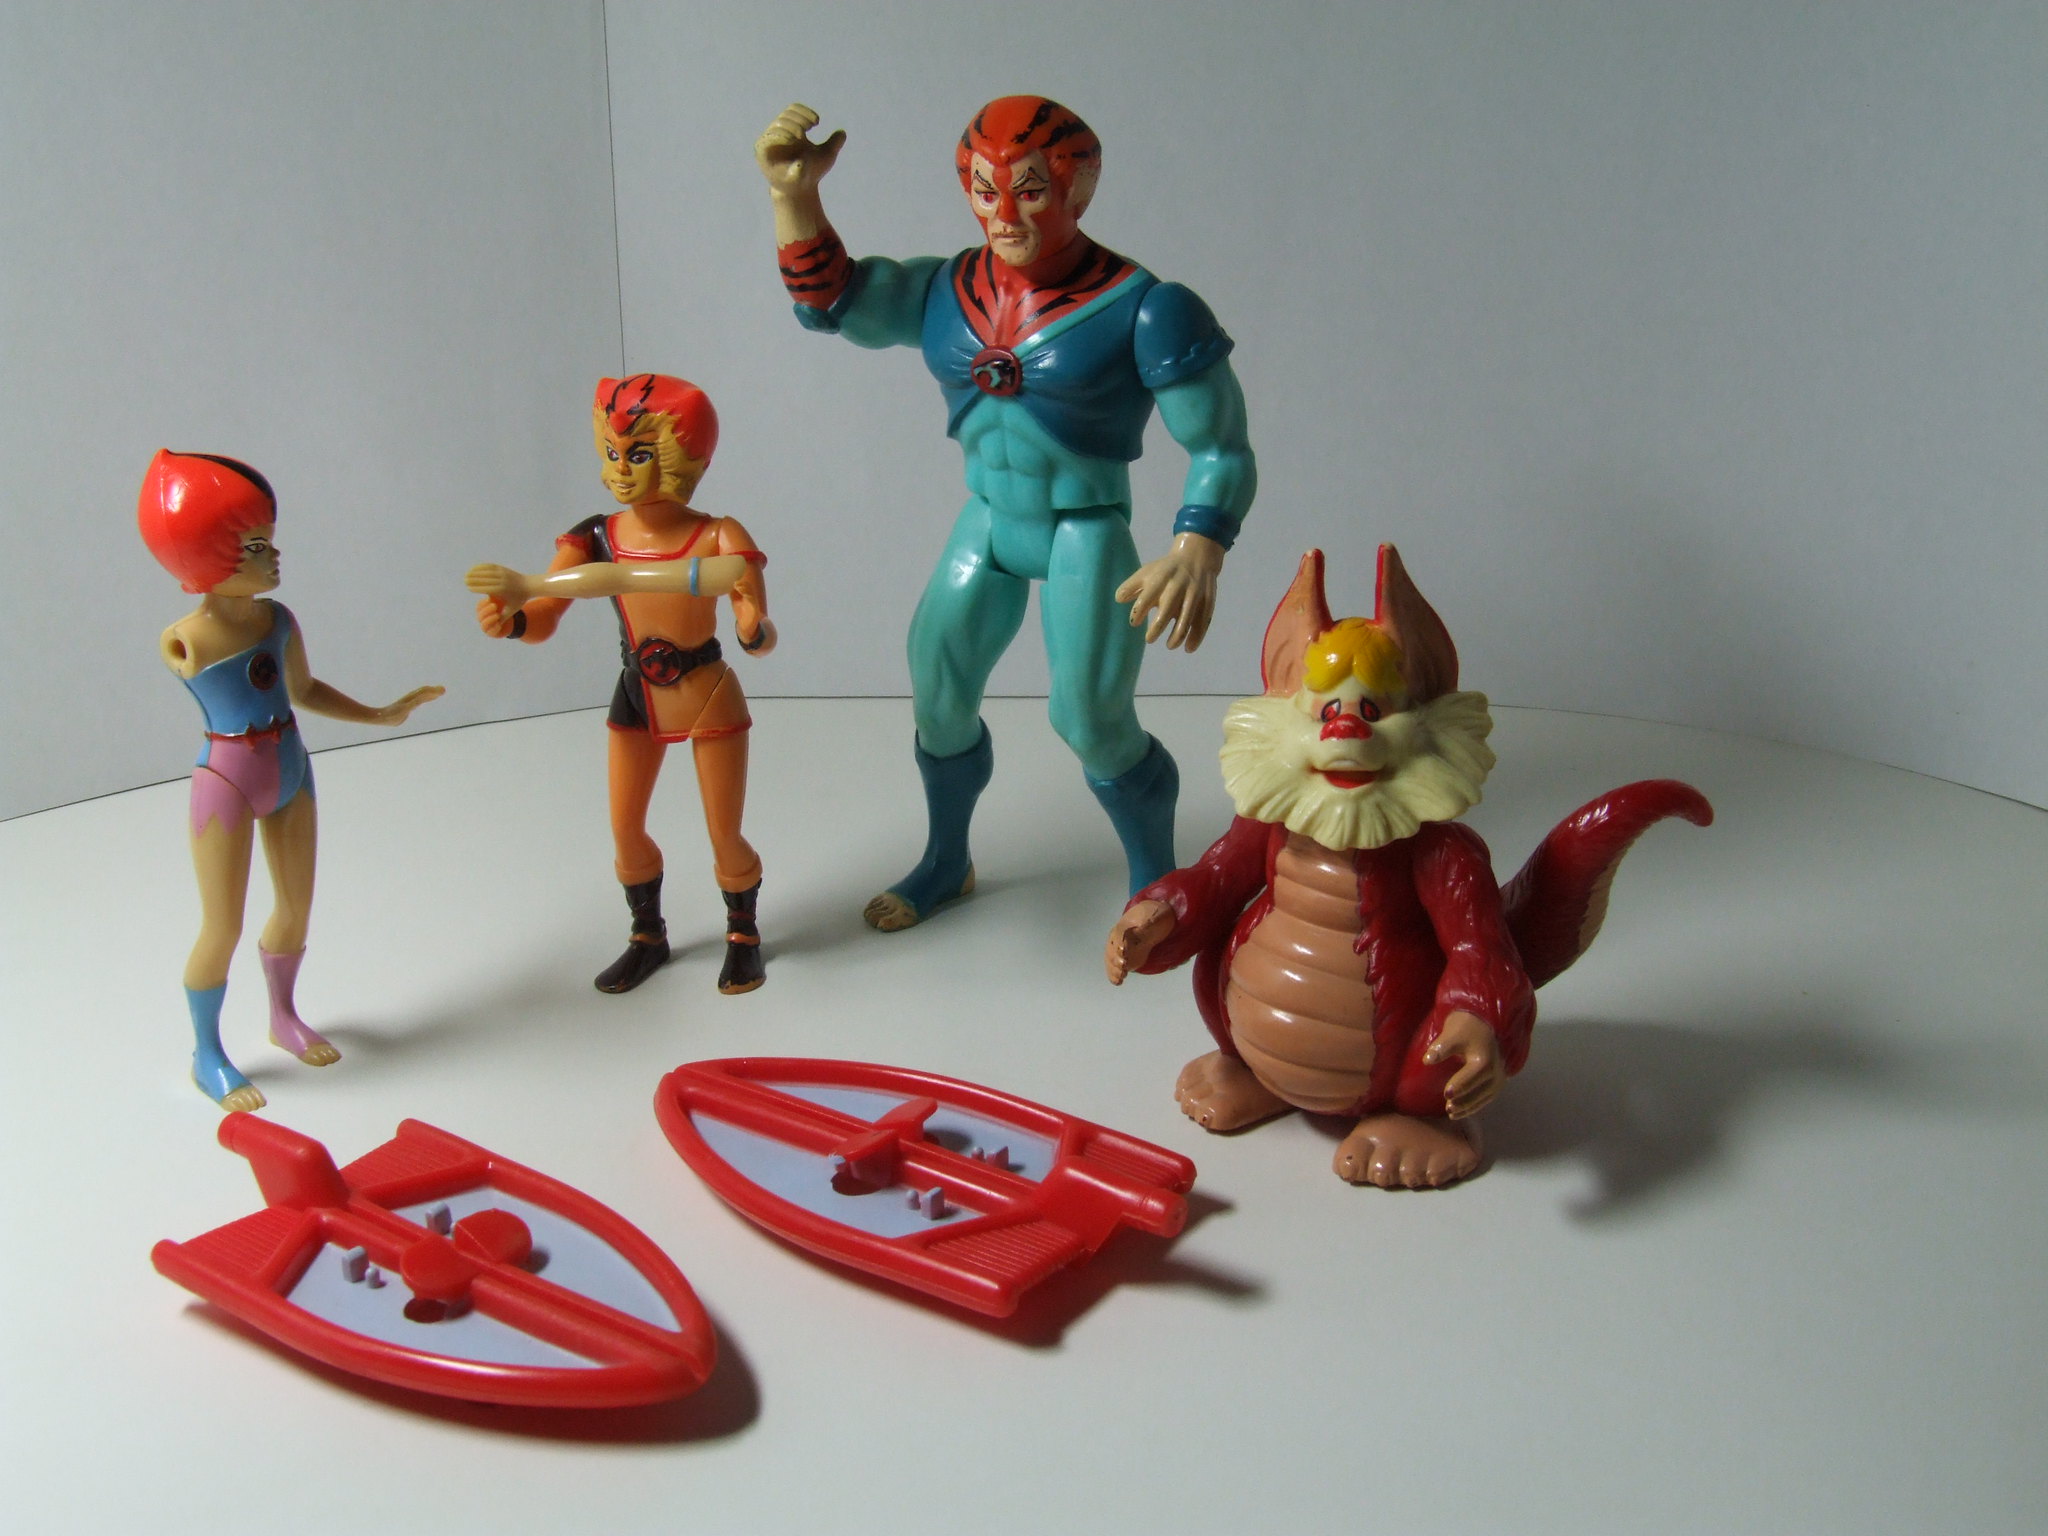 Snarf and other Thundercat action figures on a table